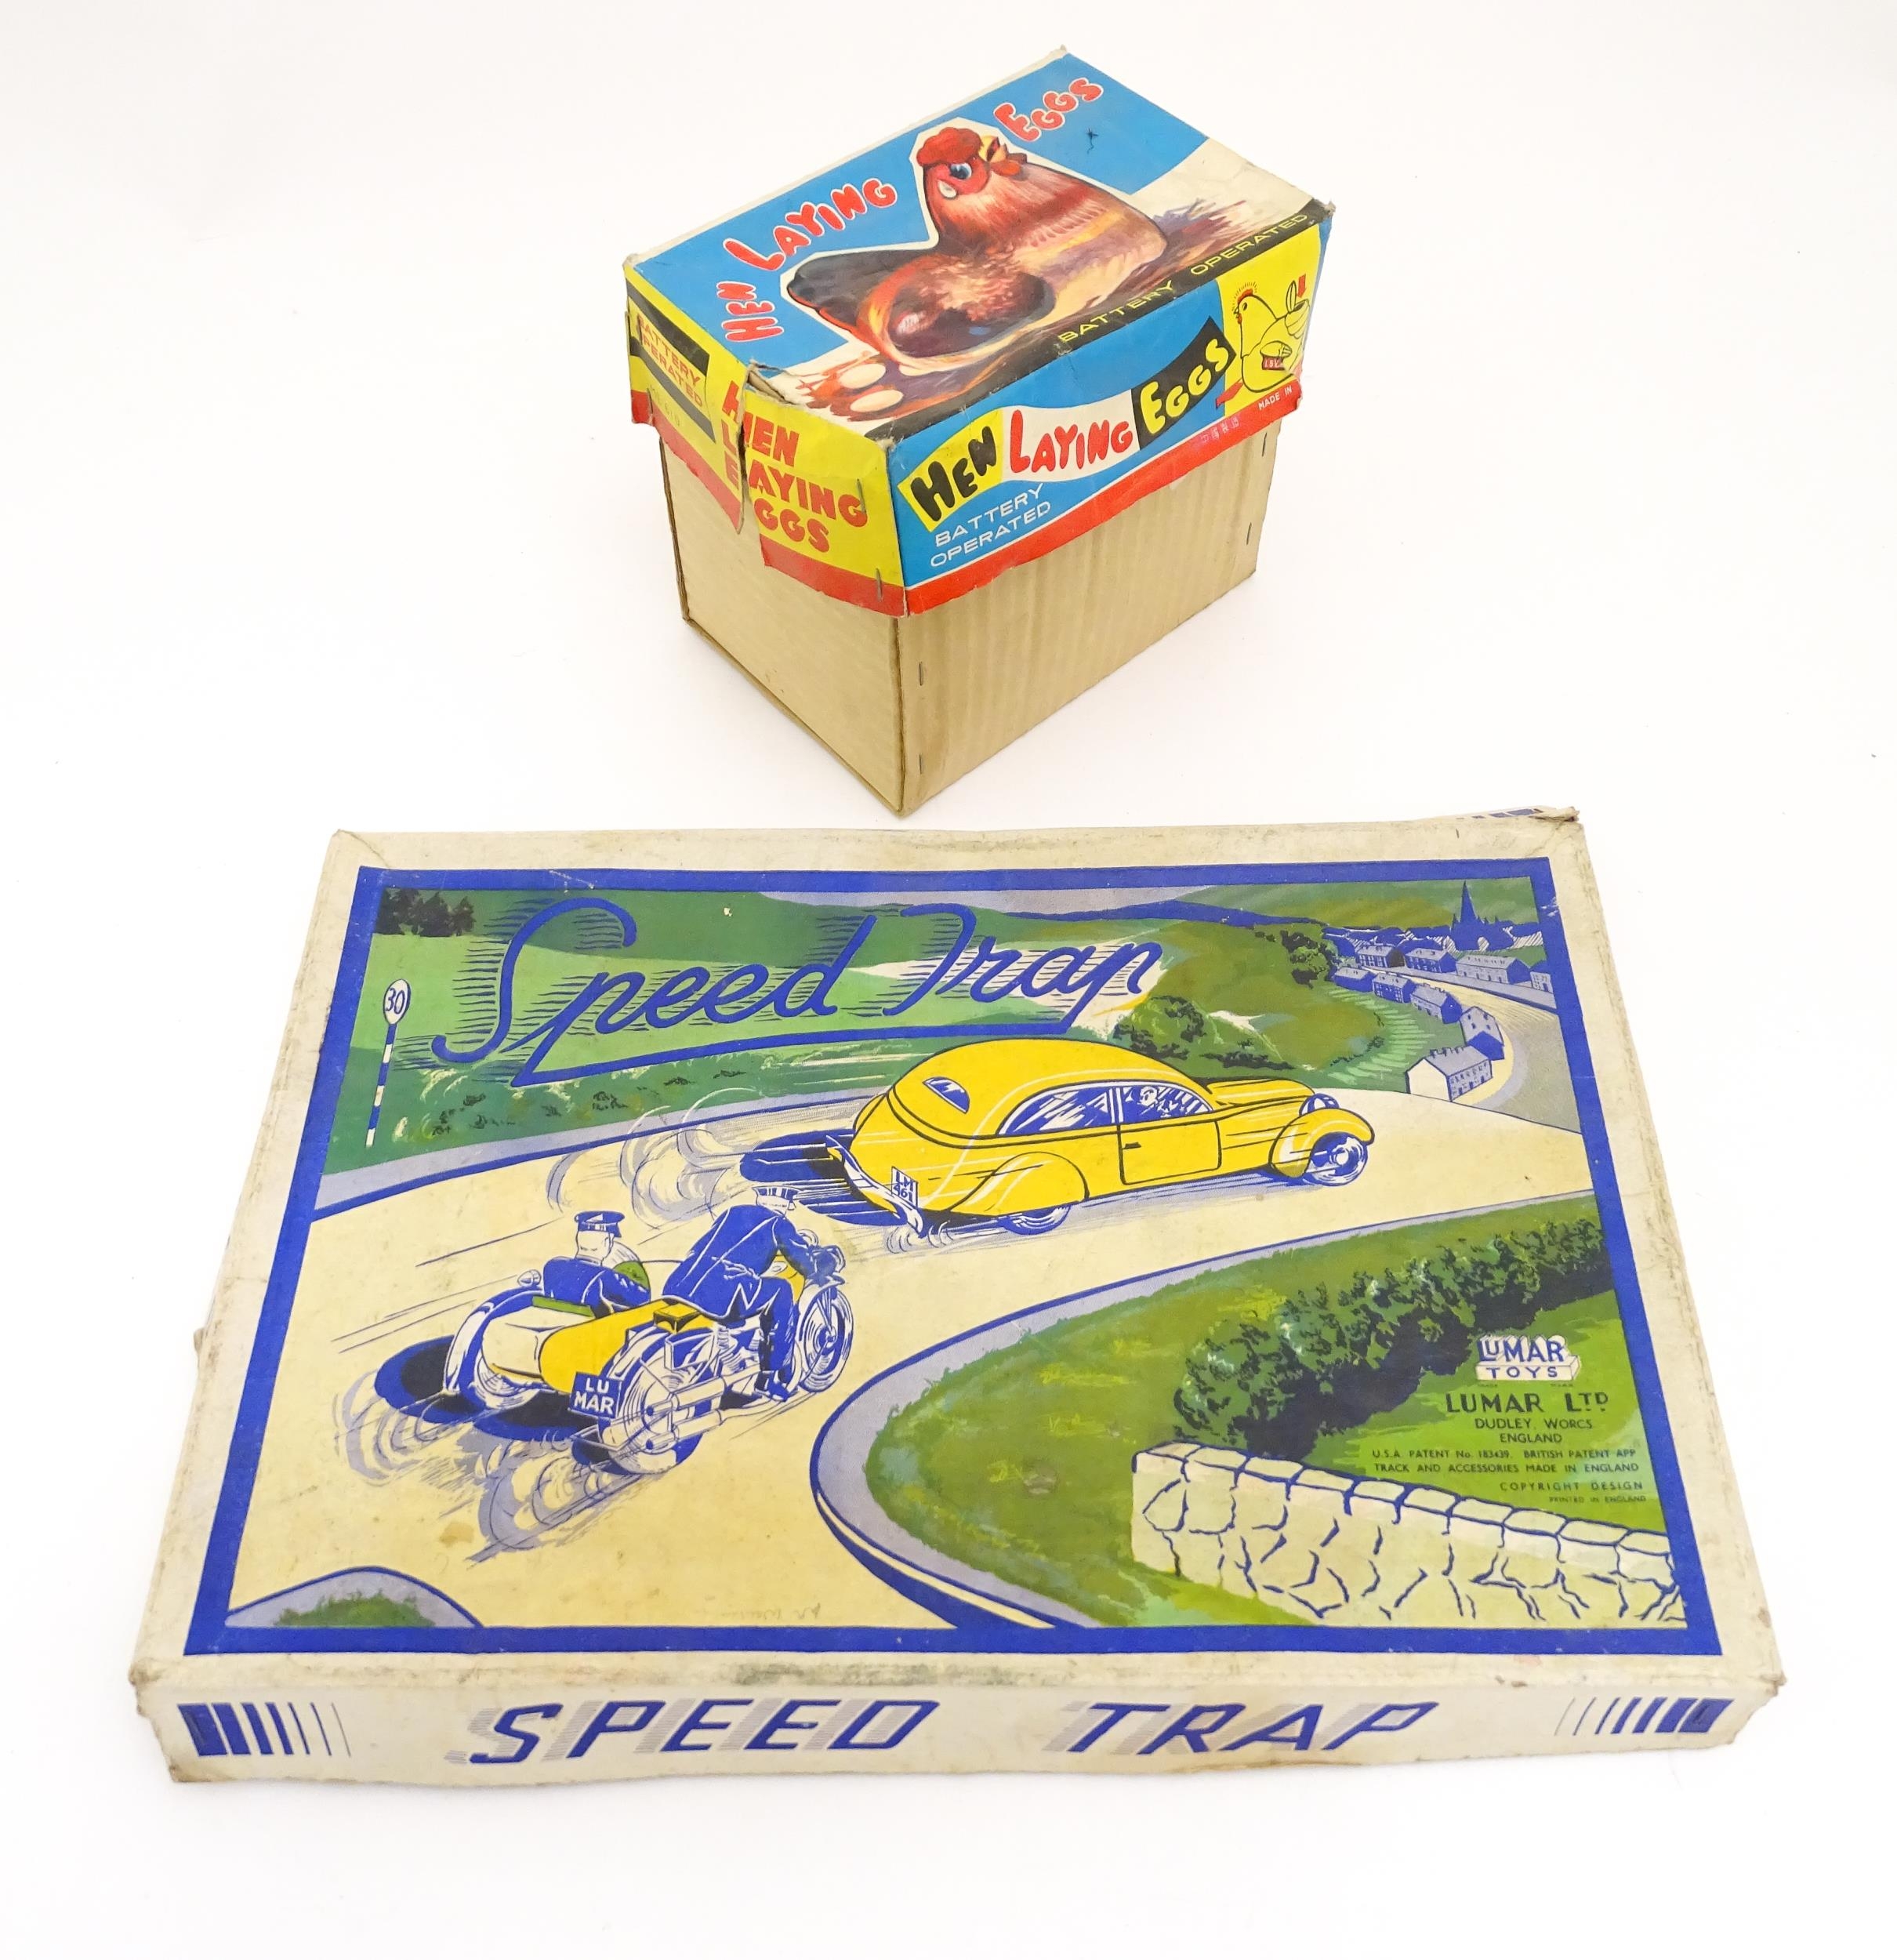 Toys: An early 20thC Lumar Toys tinplate Speed Trap clockwork game. Together with a Hen Laying